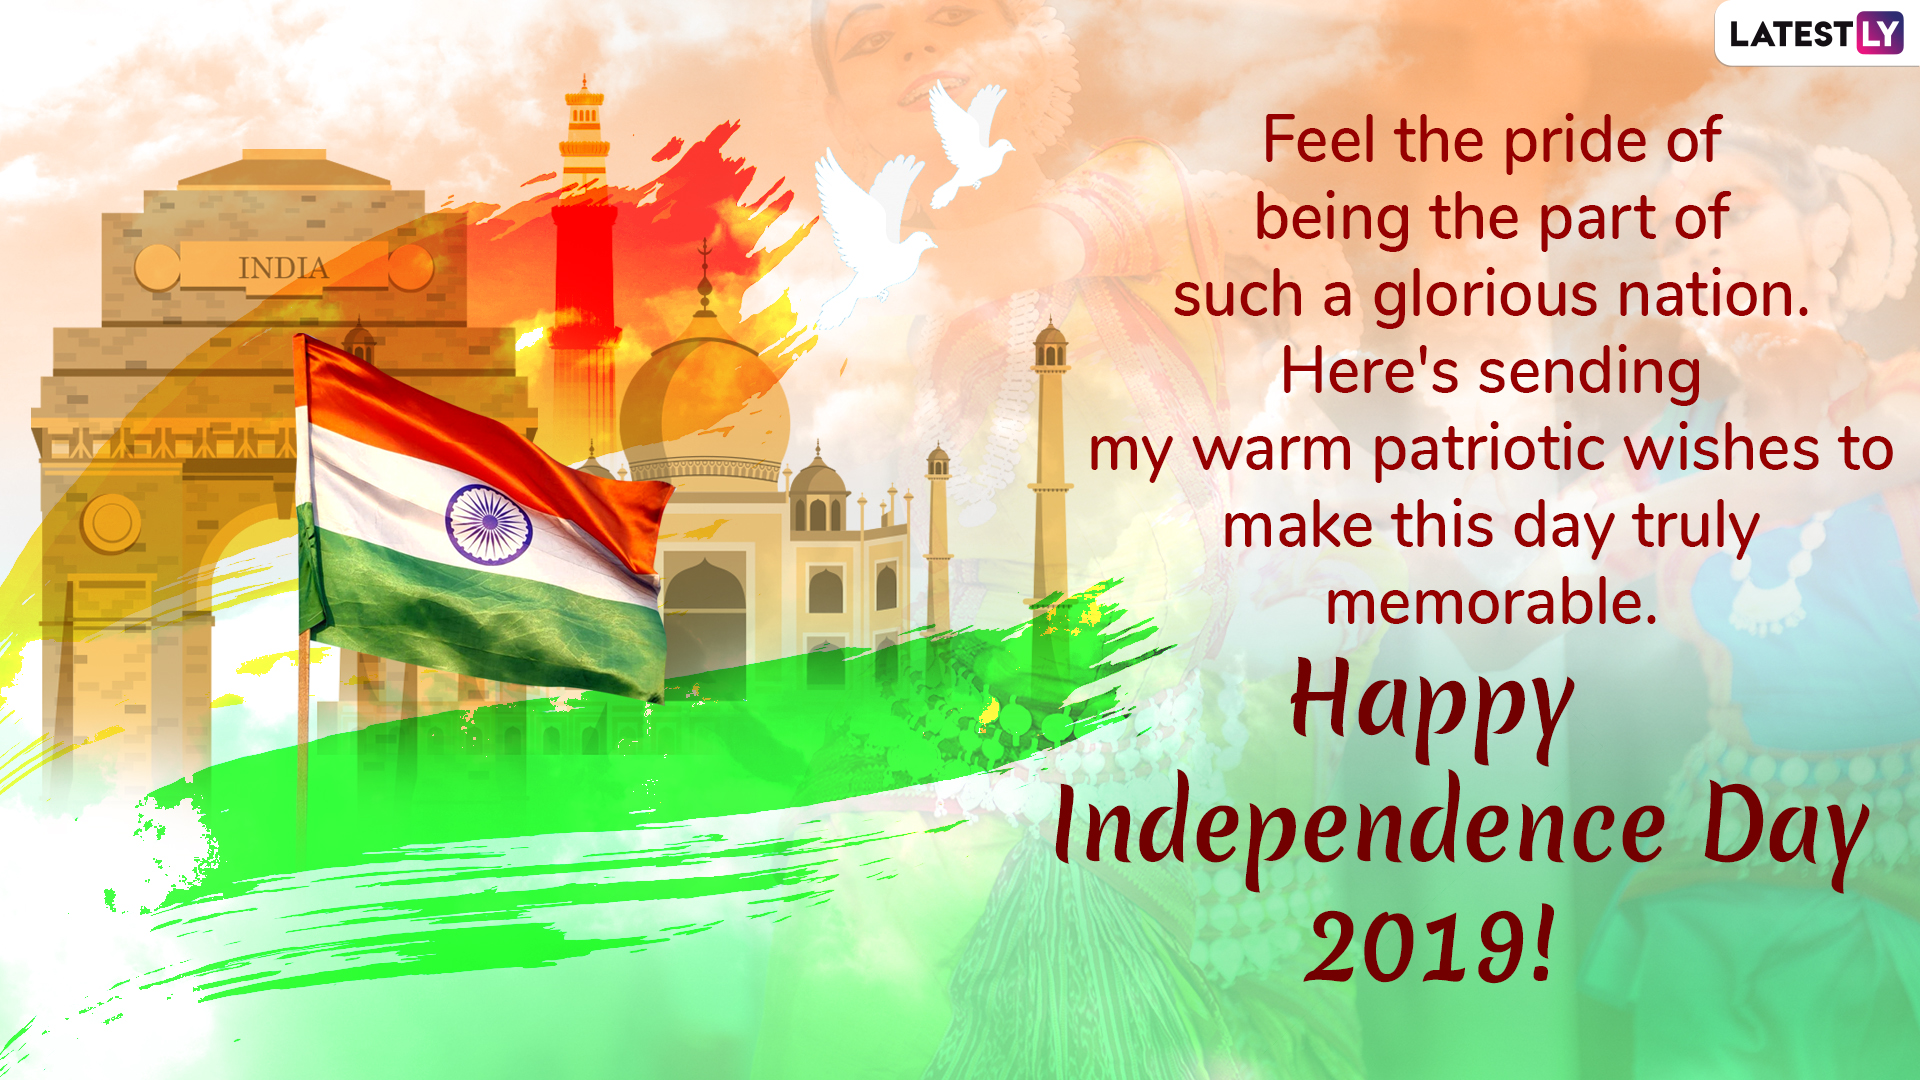 Happy Indian Independence Day 2019 Wishes WhatsApp Stickers, Patriotic